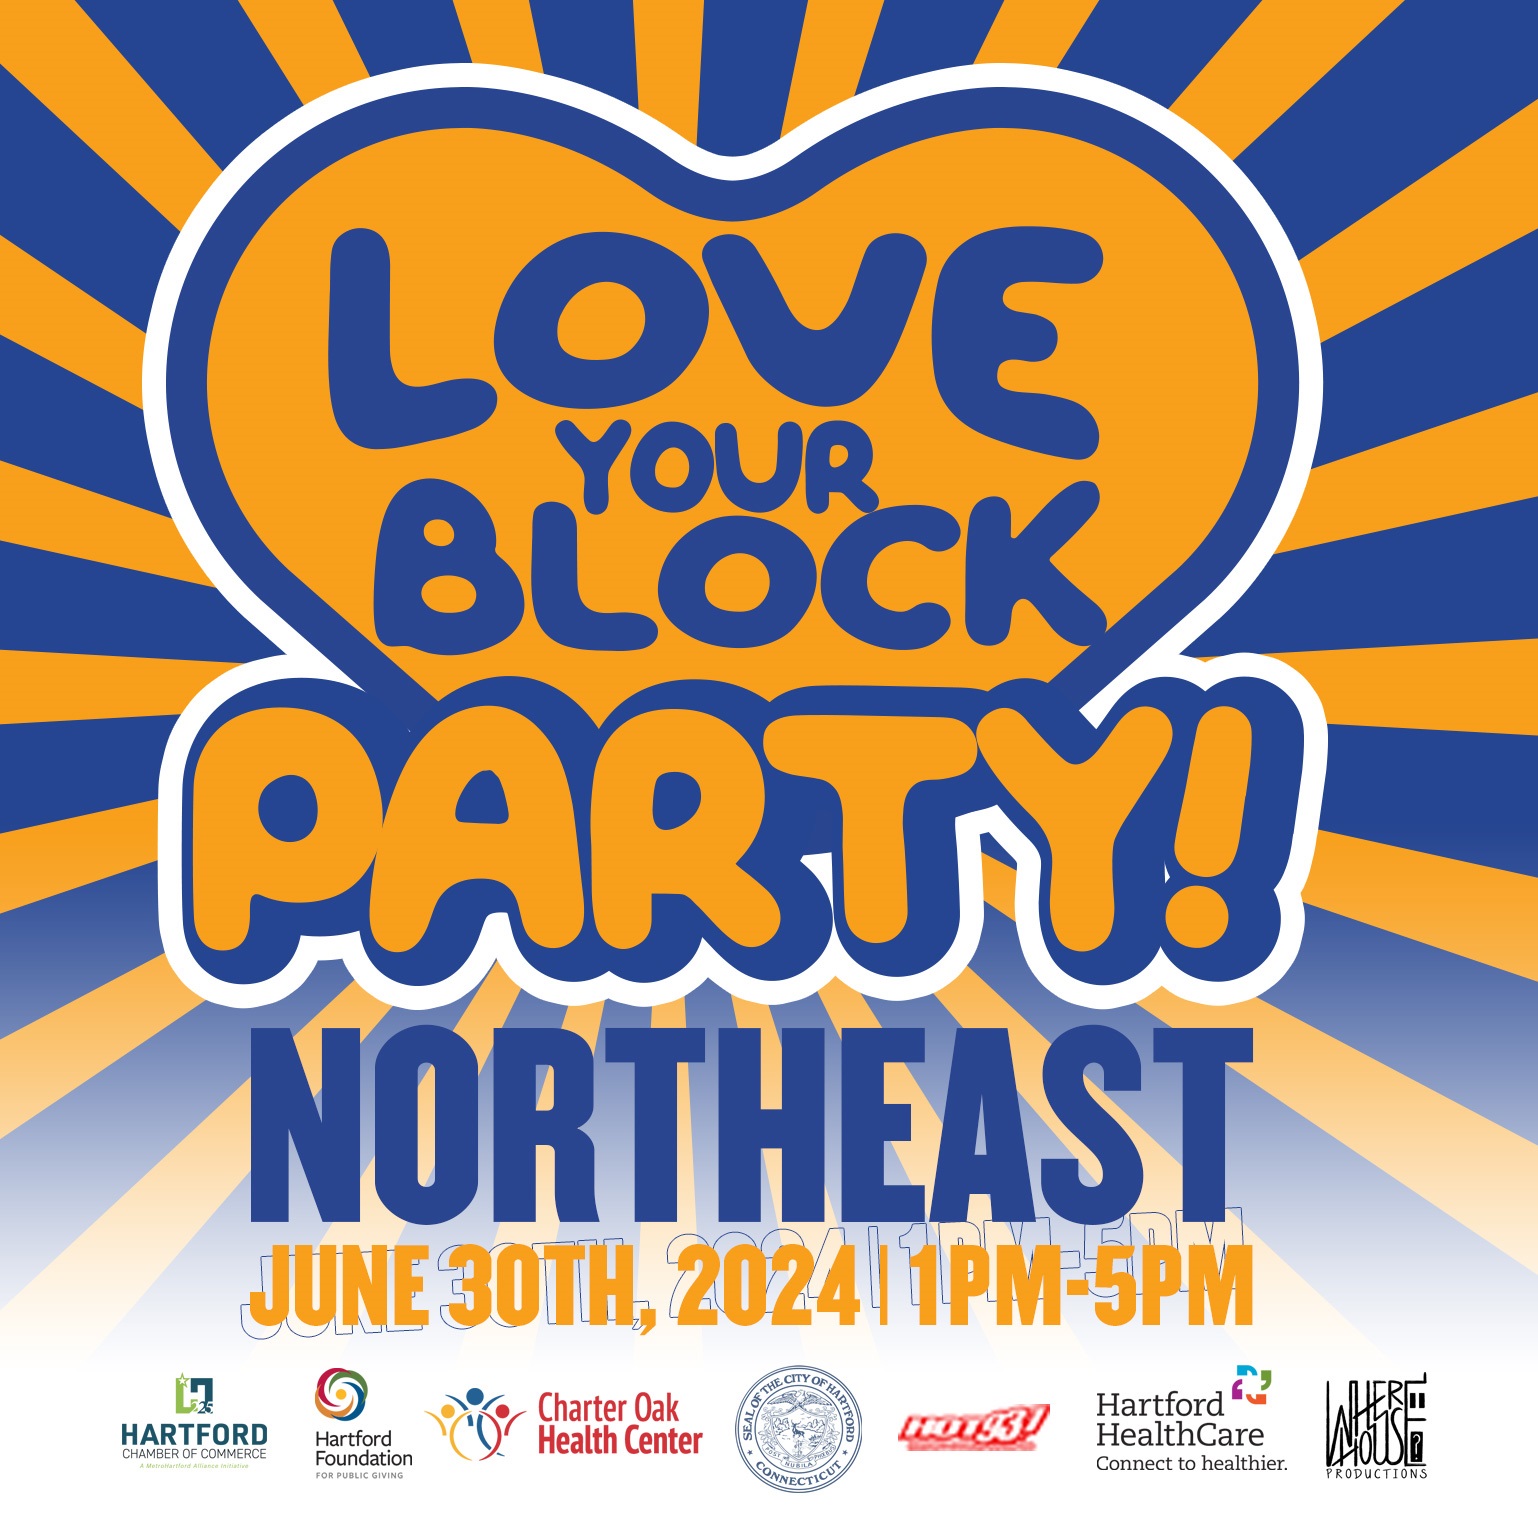 Love Your Block Party Northeast